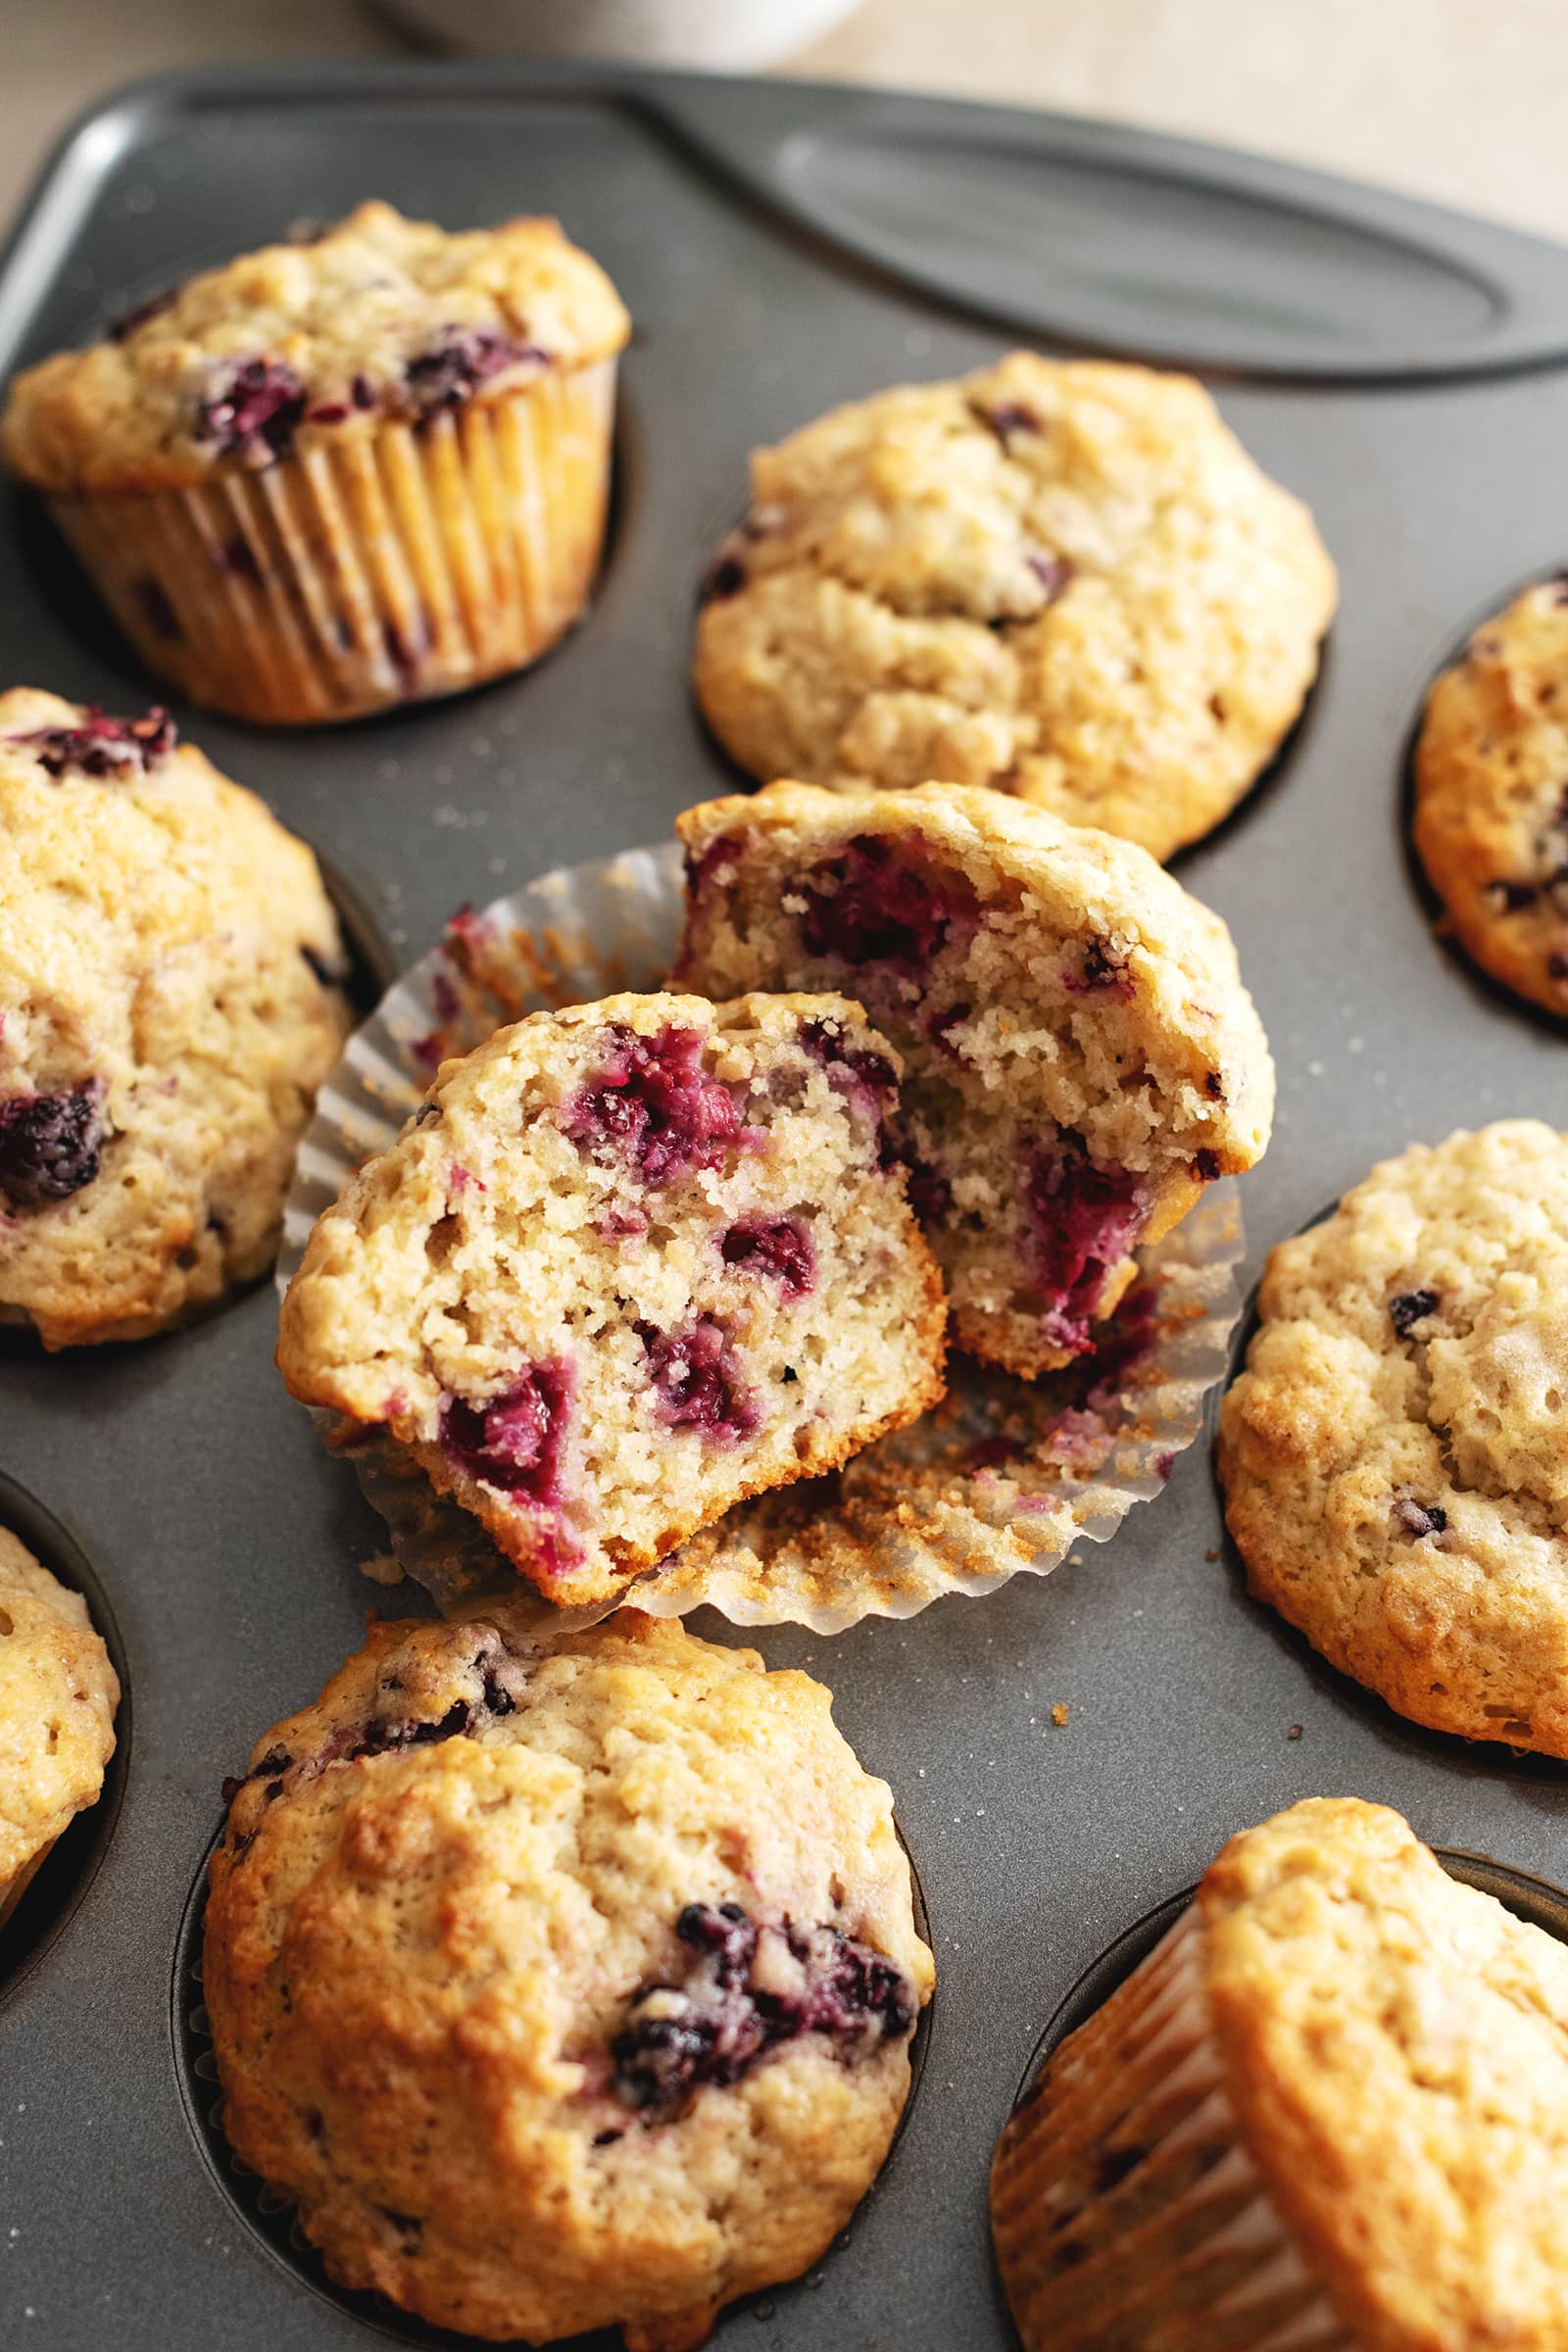 A banana blackberry oatmeal muffin cut in half to show the texture inside.